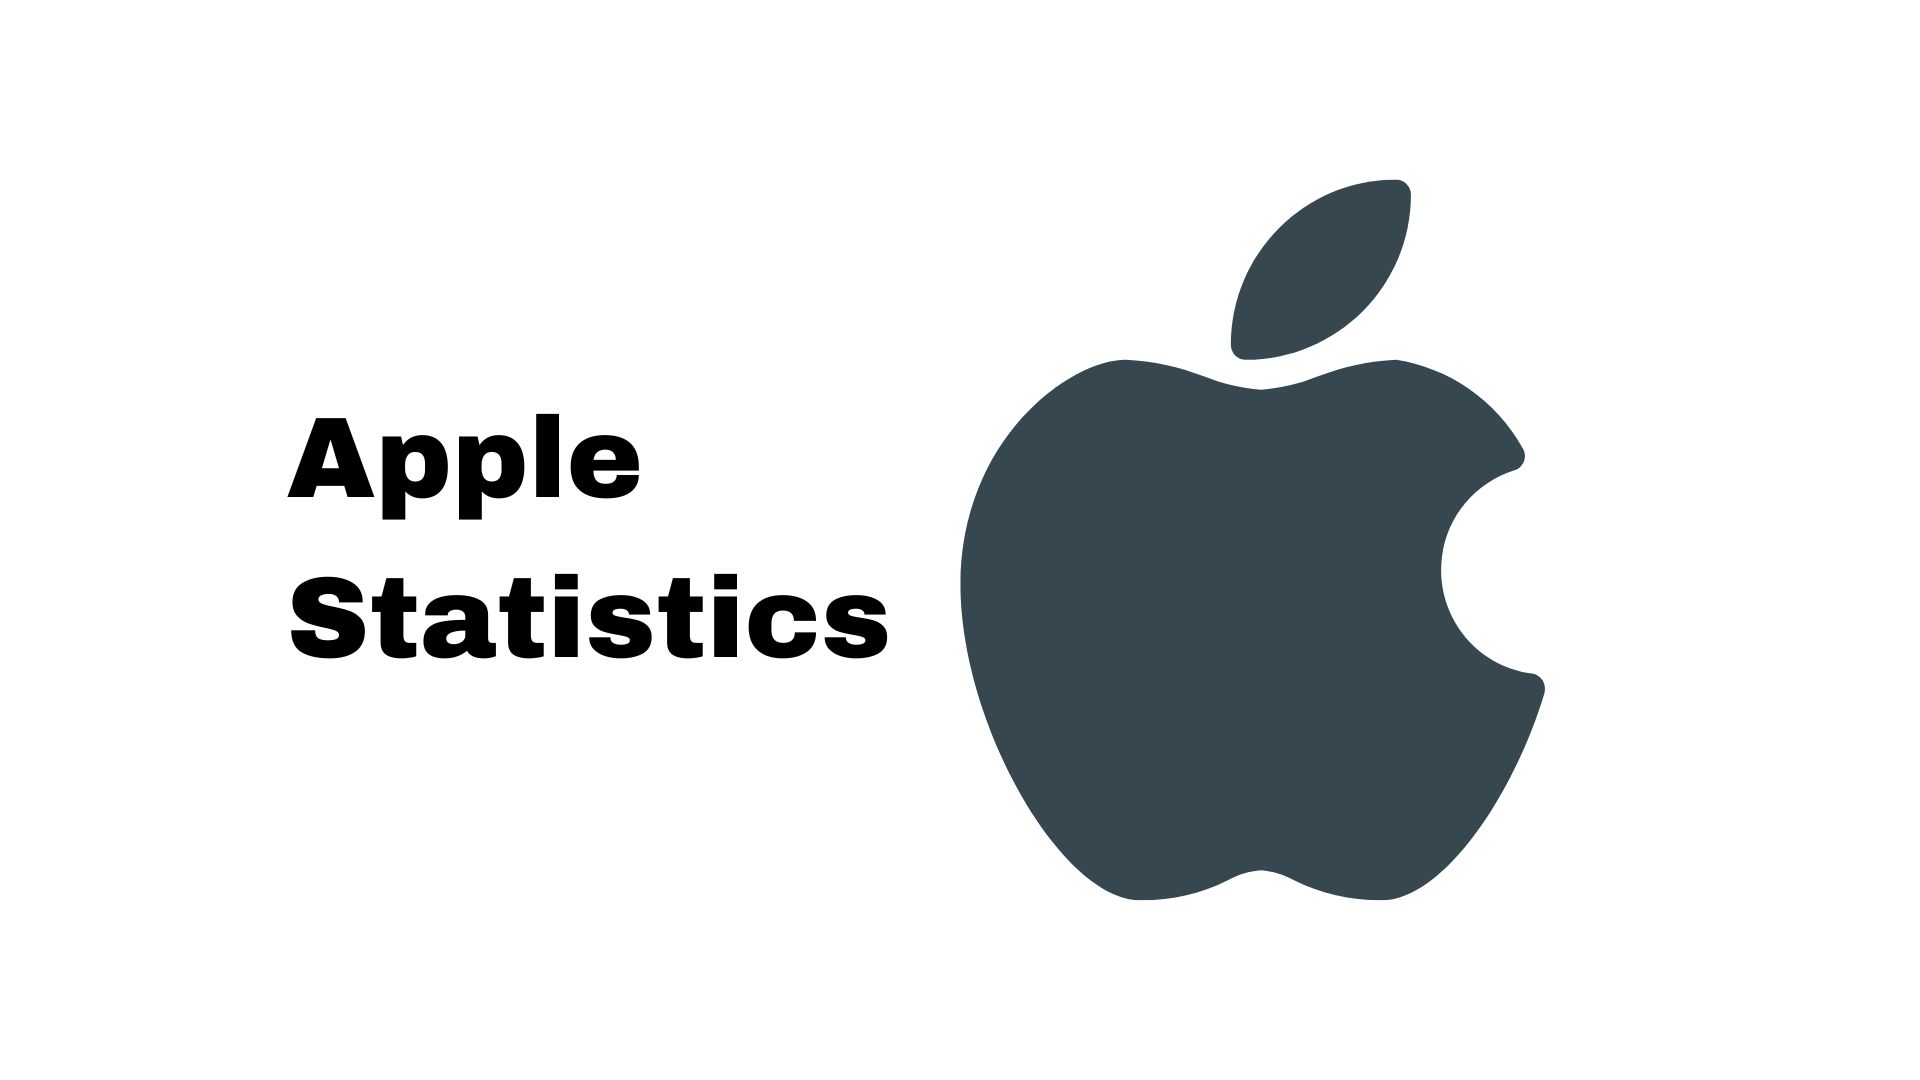 Apple Statistics By Products and Services, Demographics, Brand Value, Market Share, Social Media Network Traffic in the US, Region